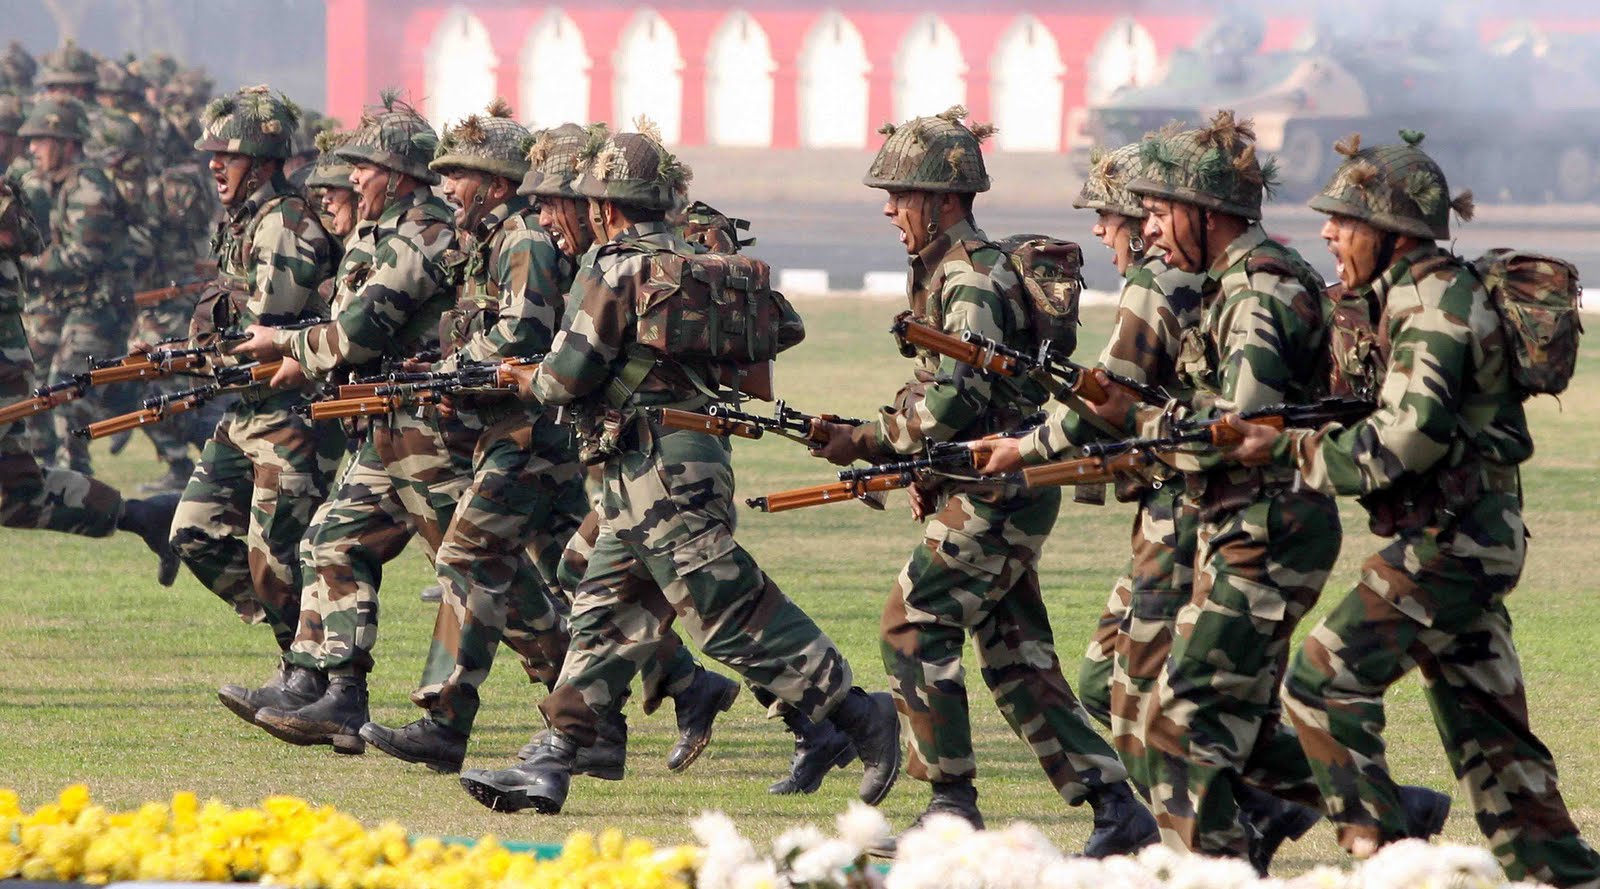 High Resolution Wallpaper Of Indian Army Into Desktop